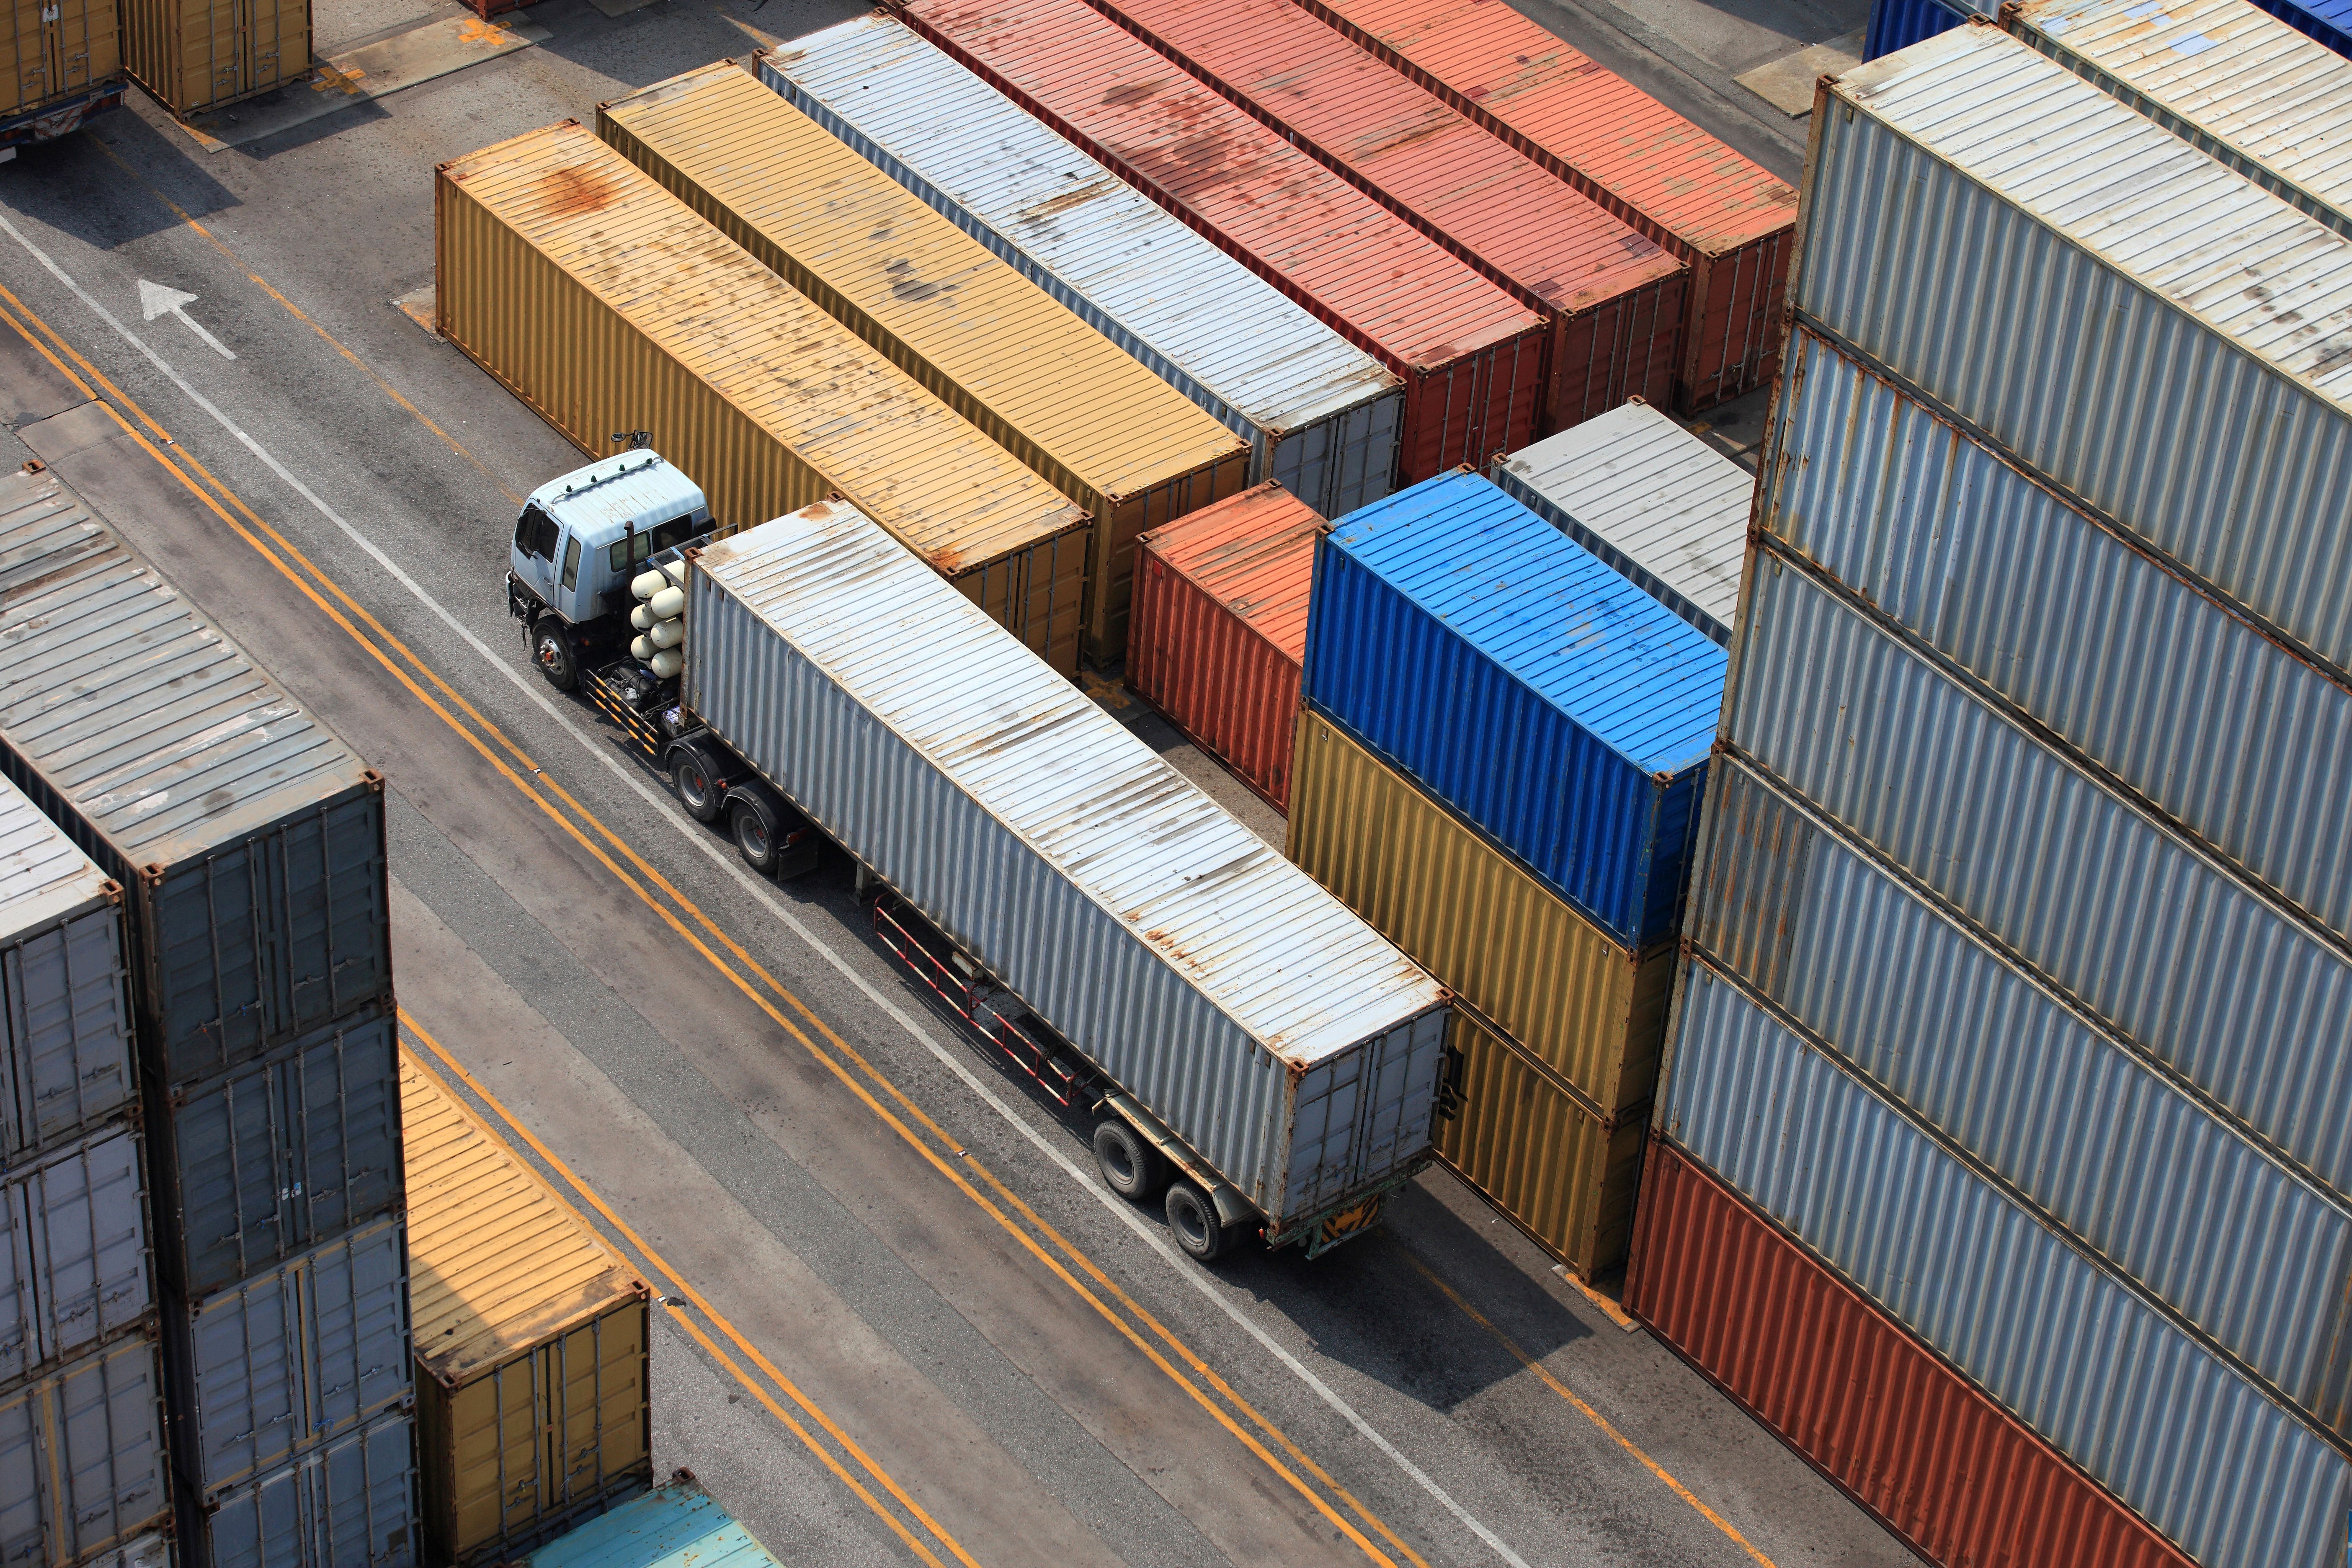 The new status for Container drayage: hot commodity.